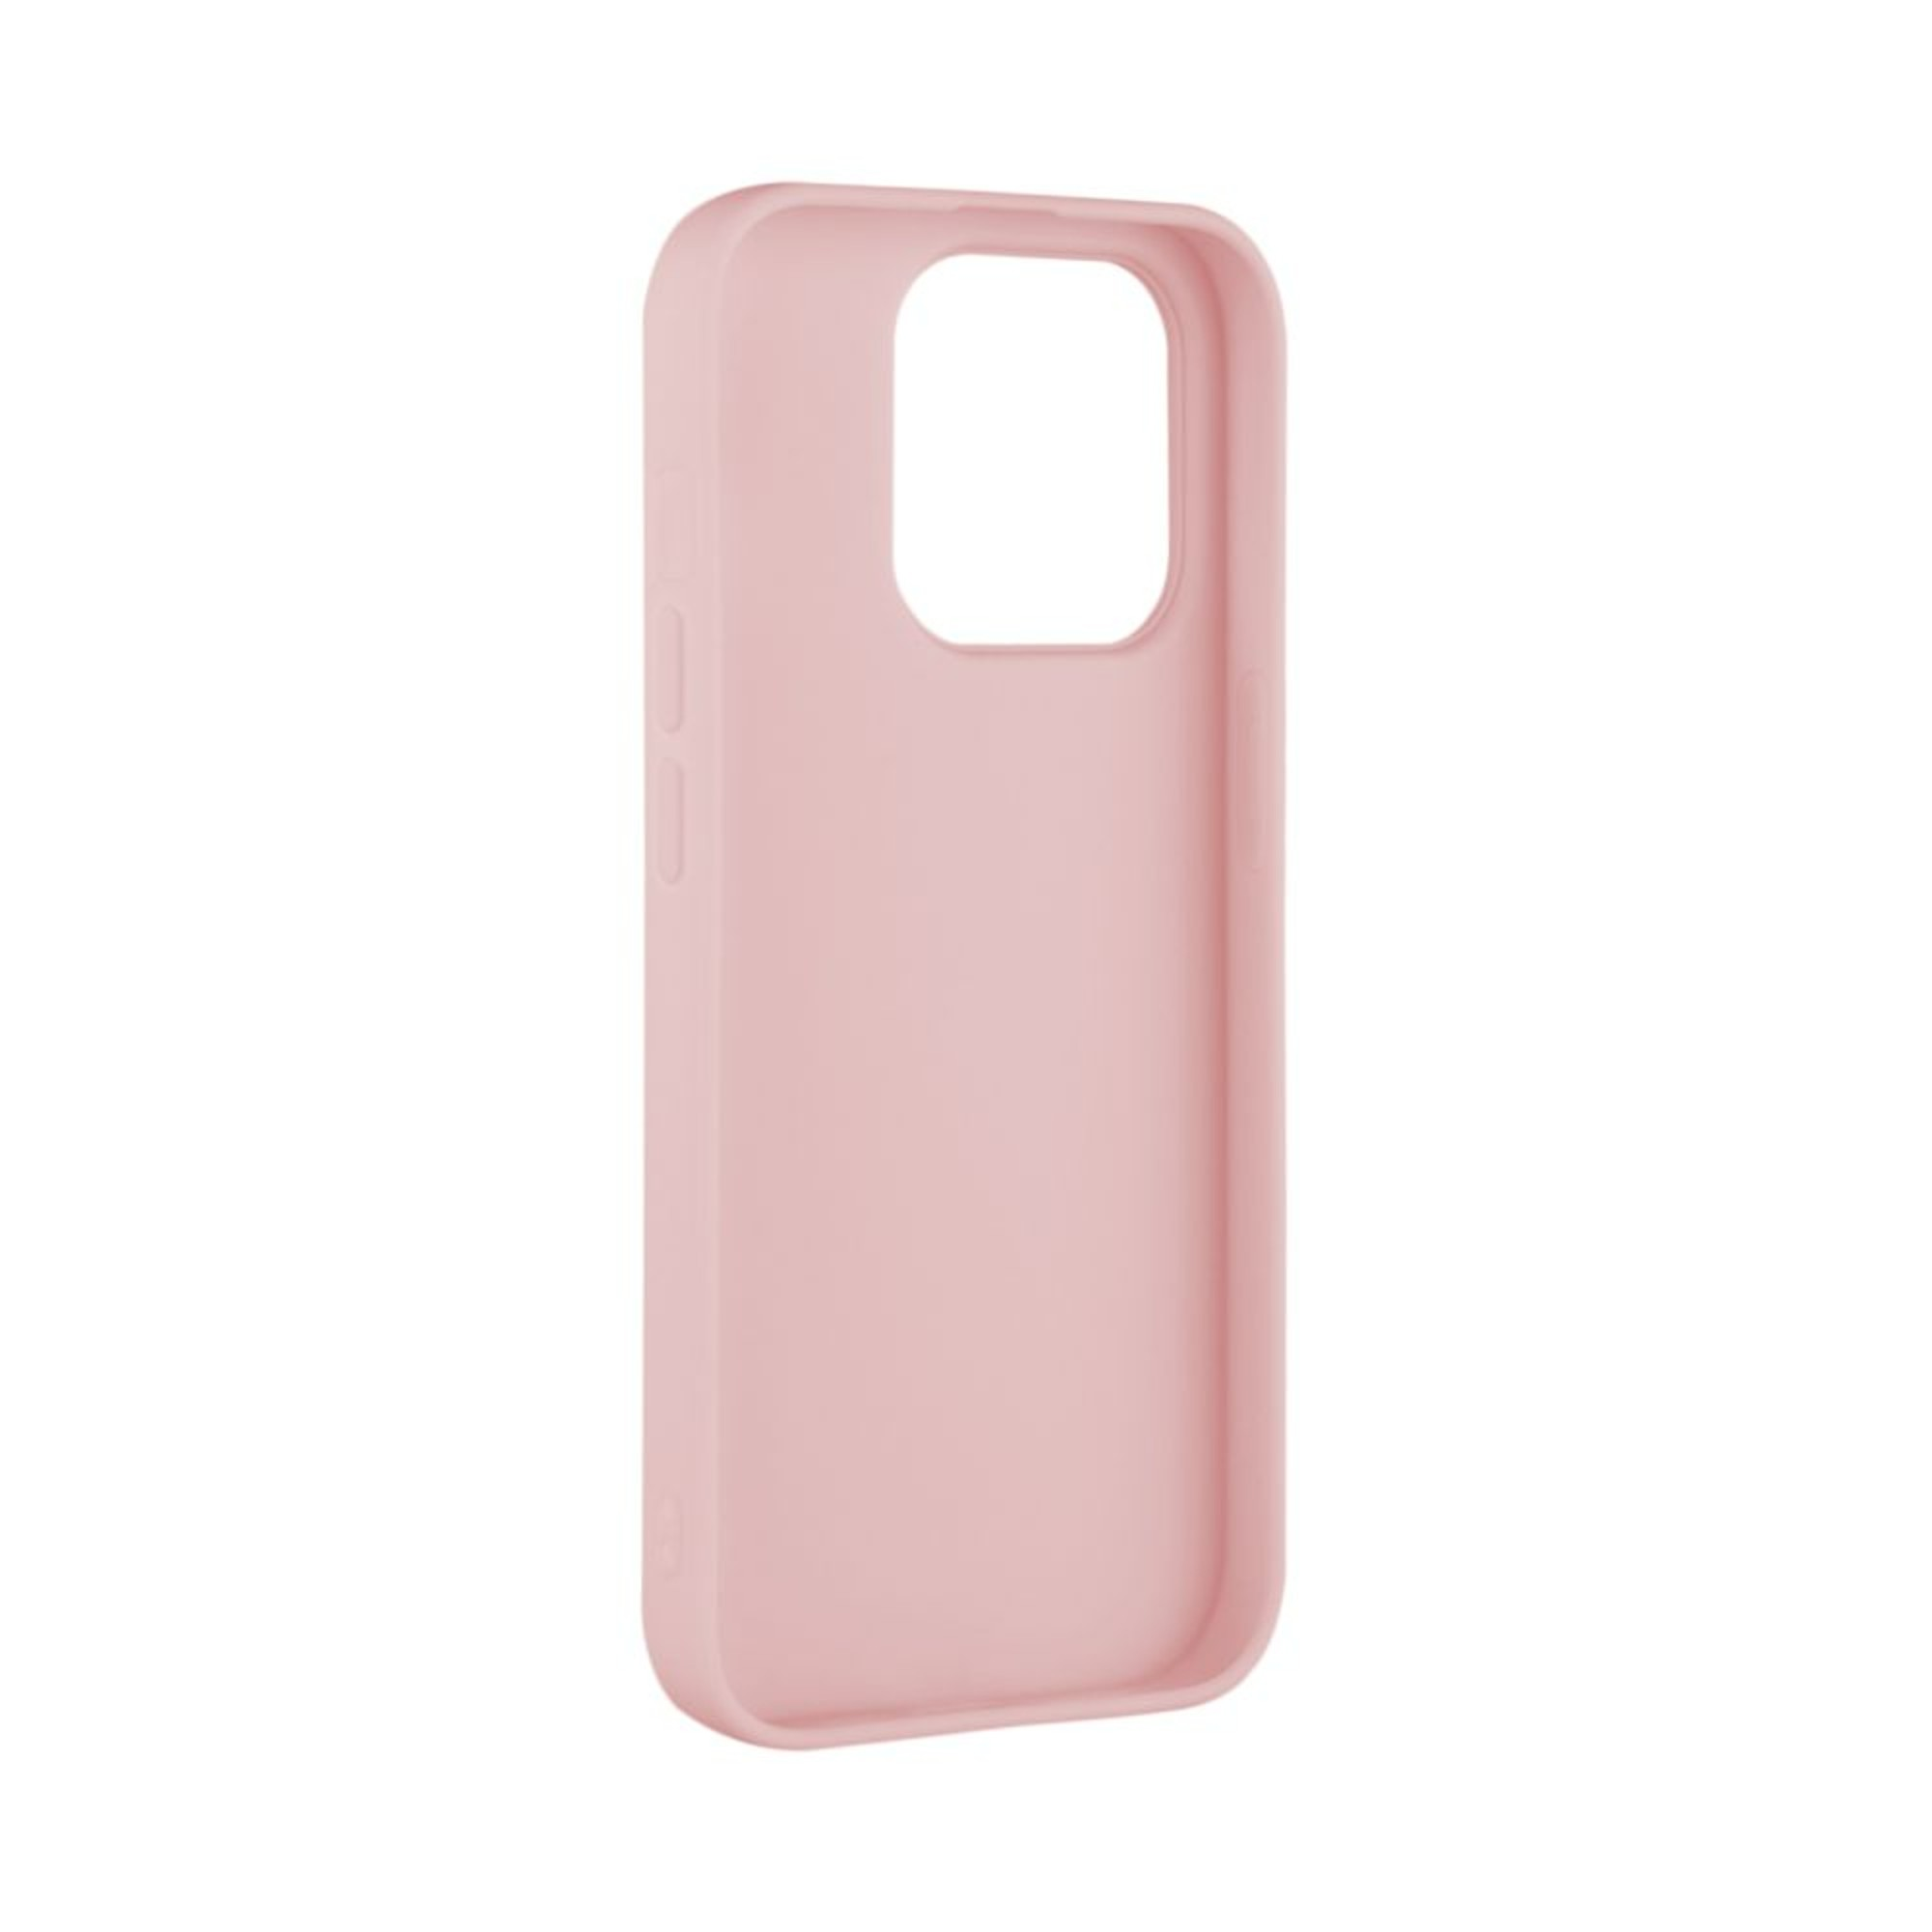 iPhone FIXED Plus, Backcover, 14 Rosa FIXST-929-PK, Apple,